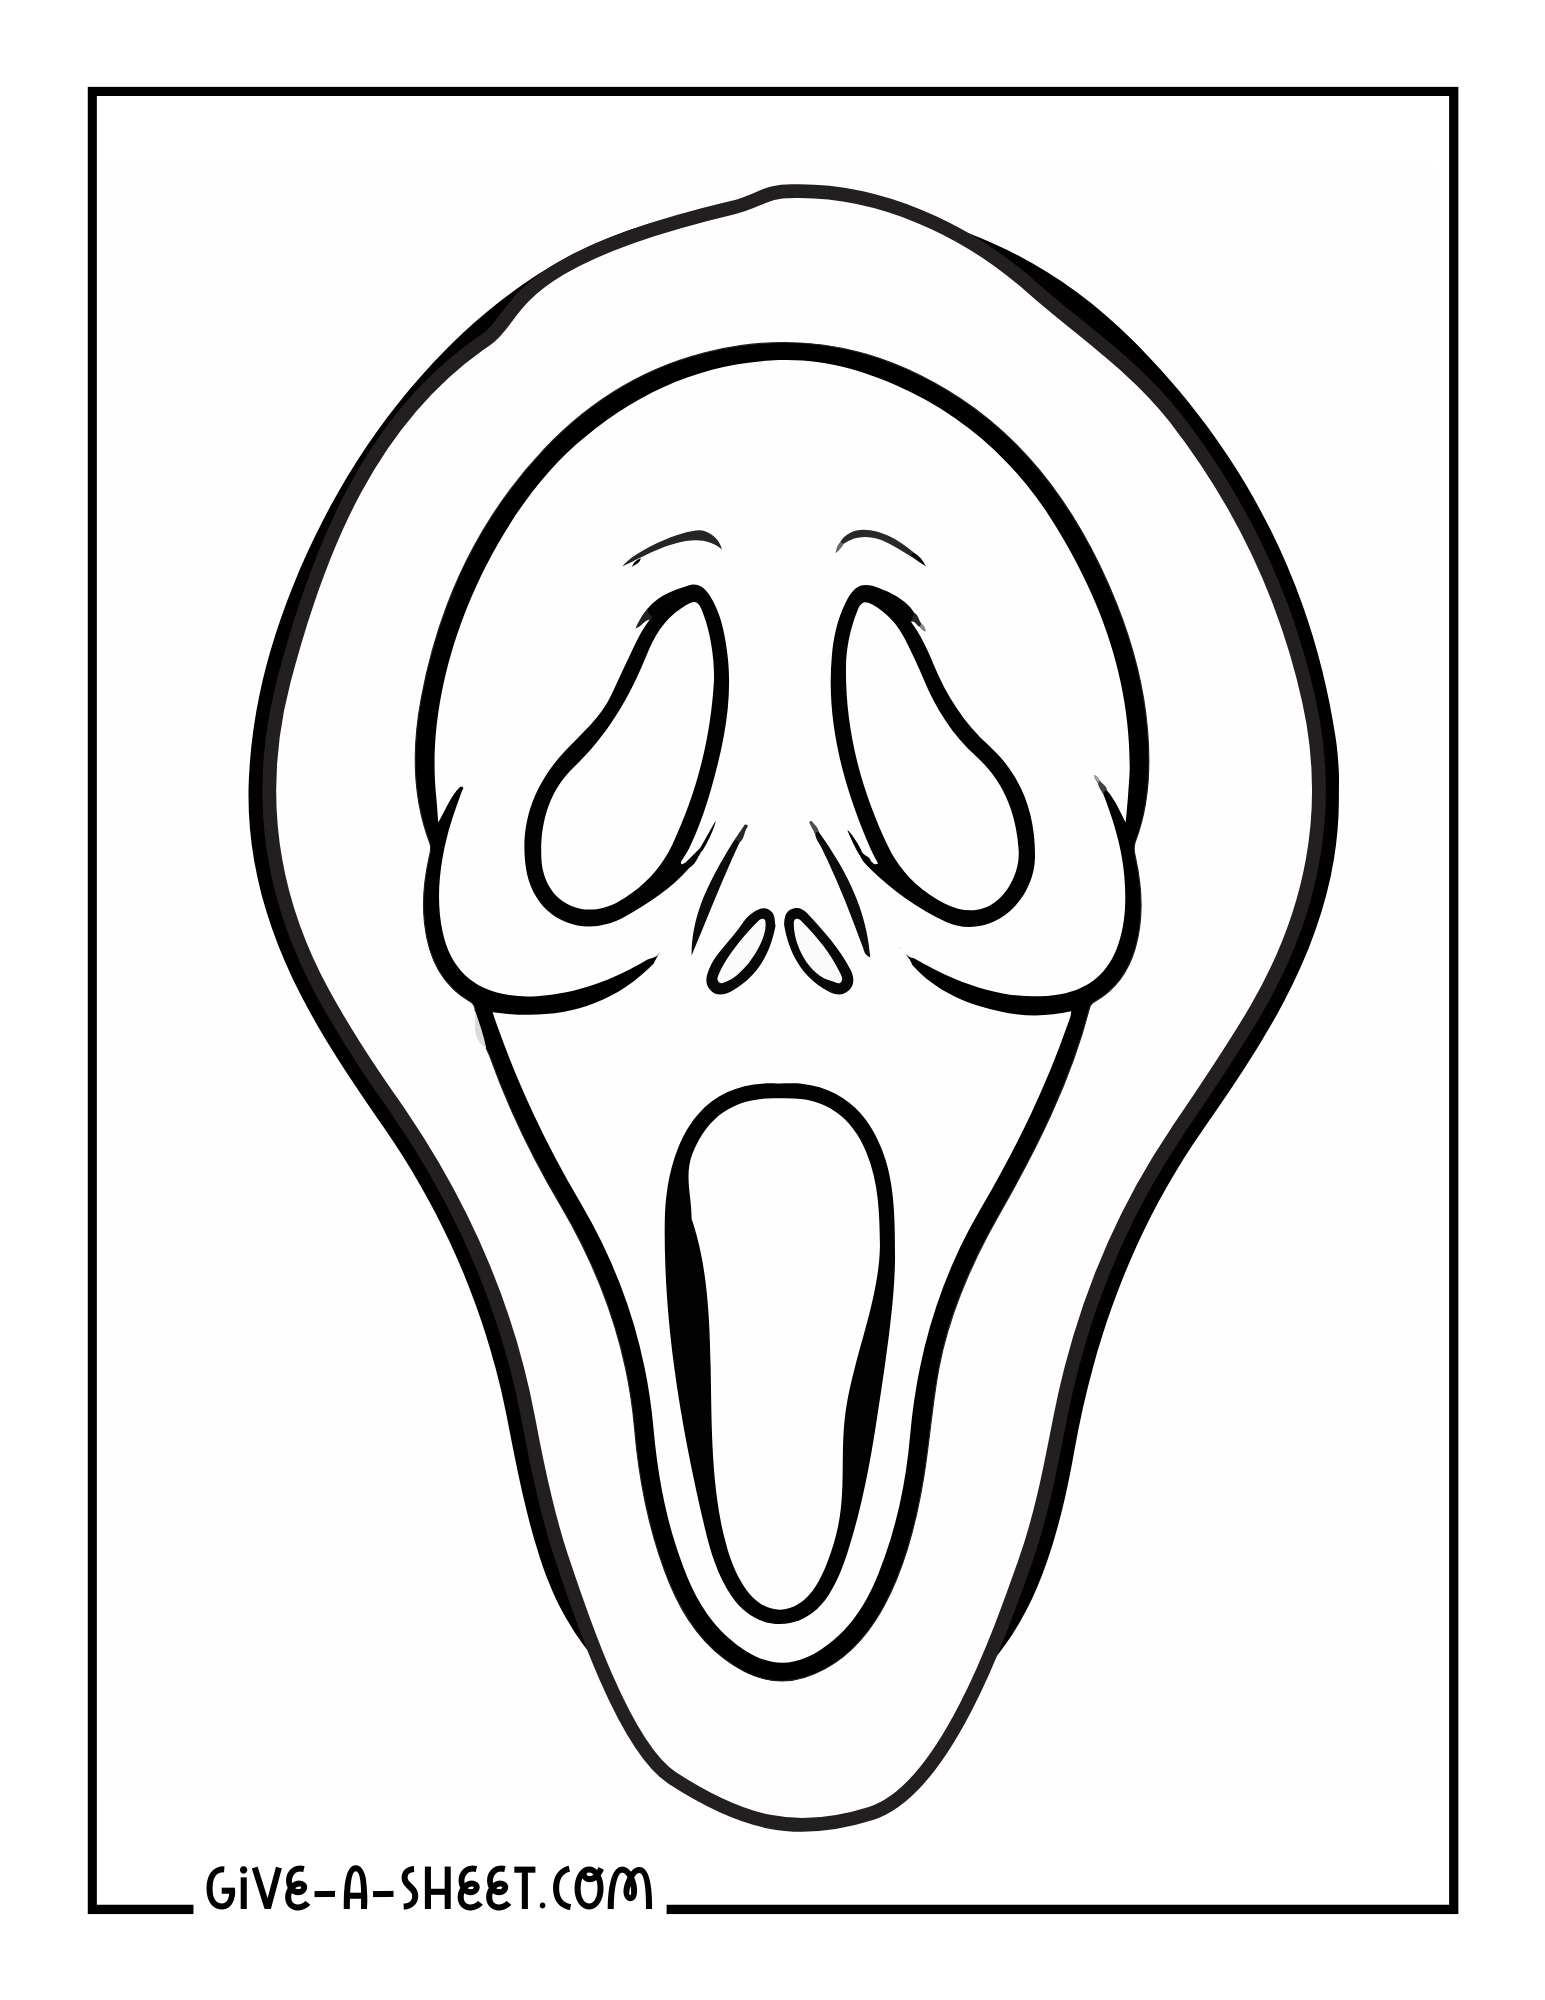 Ghostface clipart coloring page.